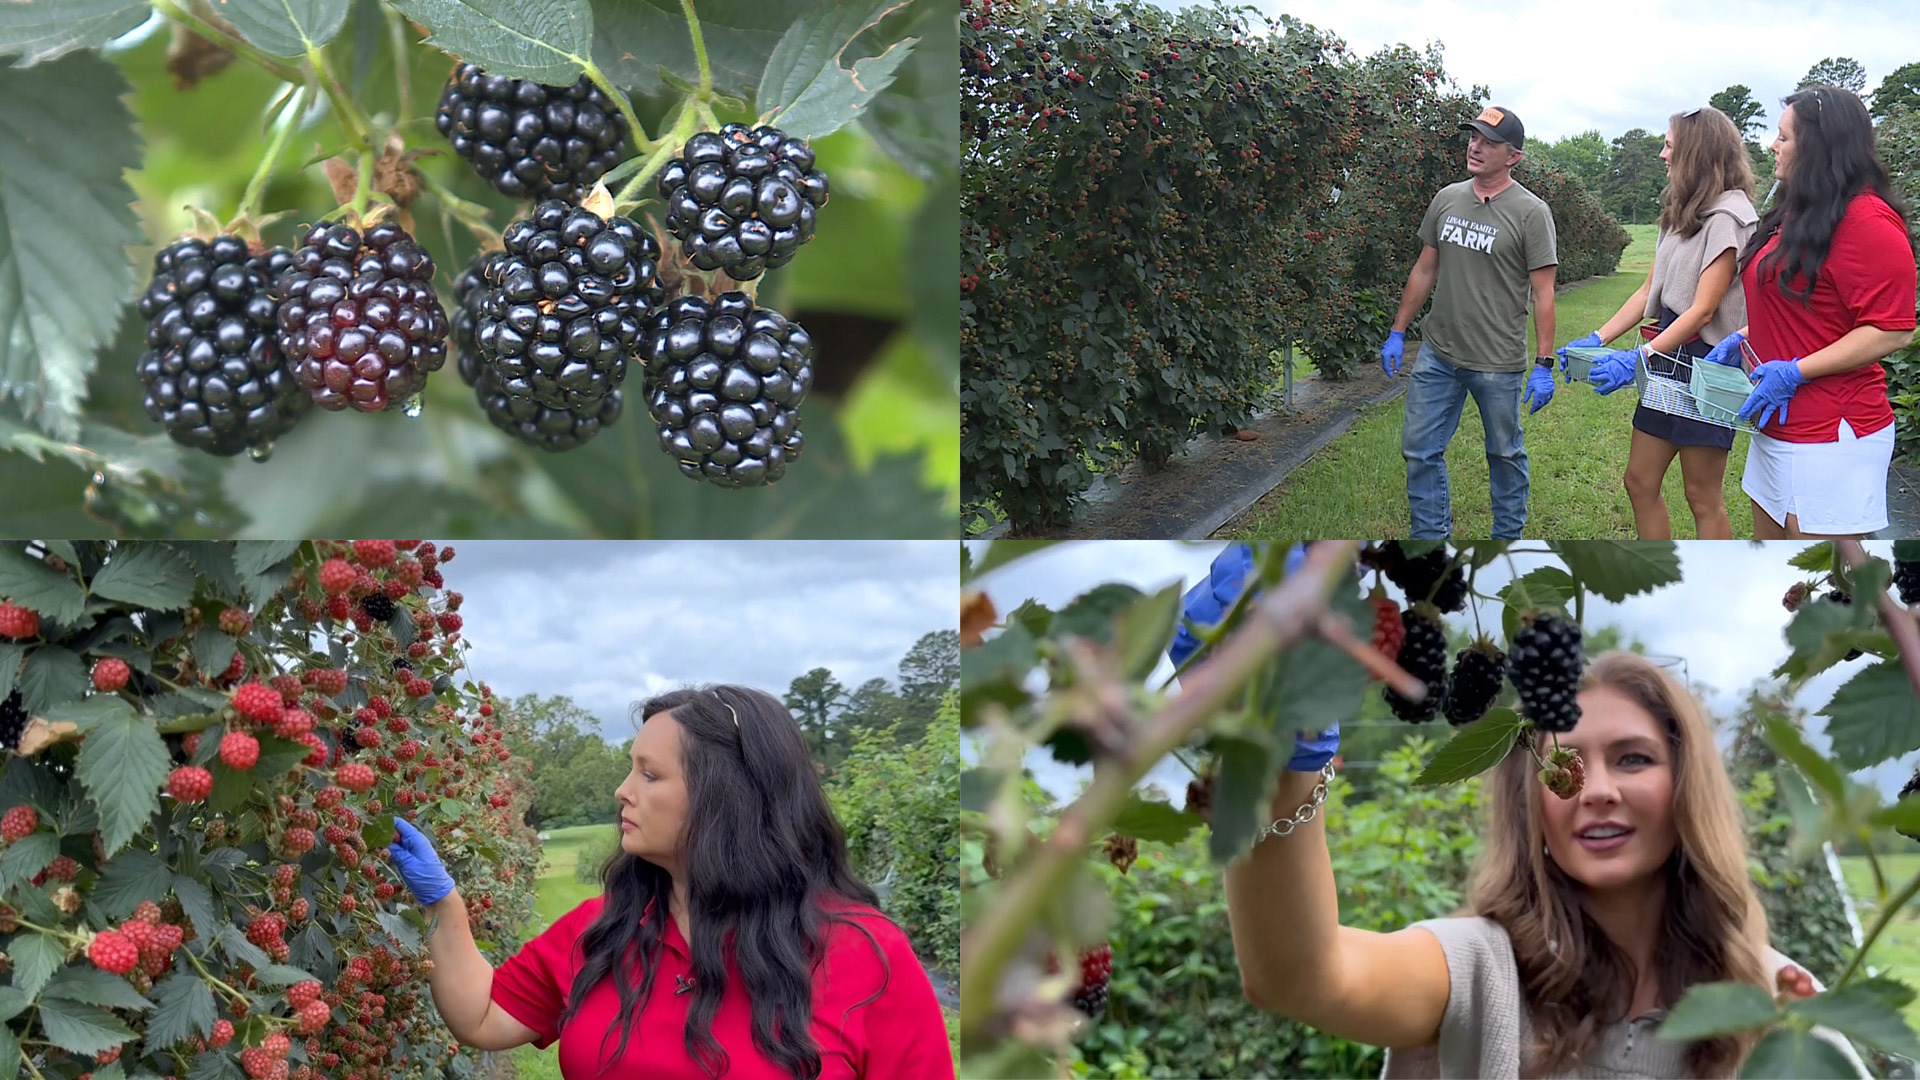 On this episode of Around the Corner, the new Alma farm's owner Chris Linam showed the 5NEWS morning crew how to pick the perfect blackberry.